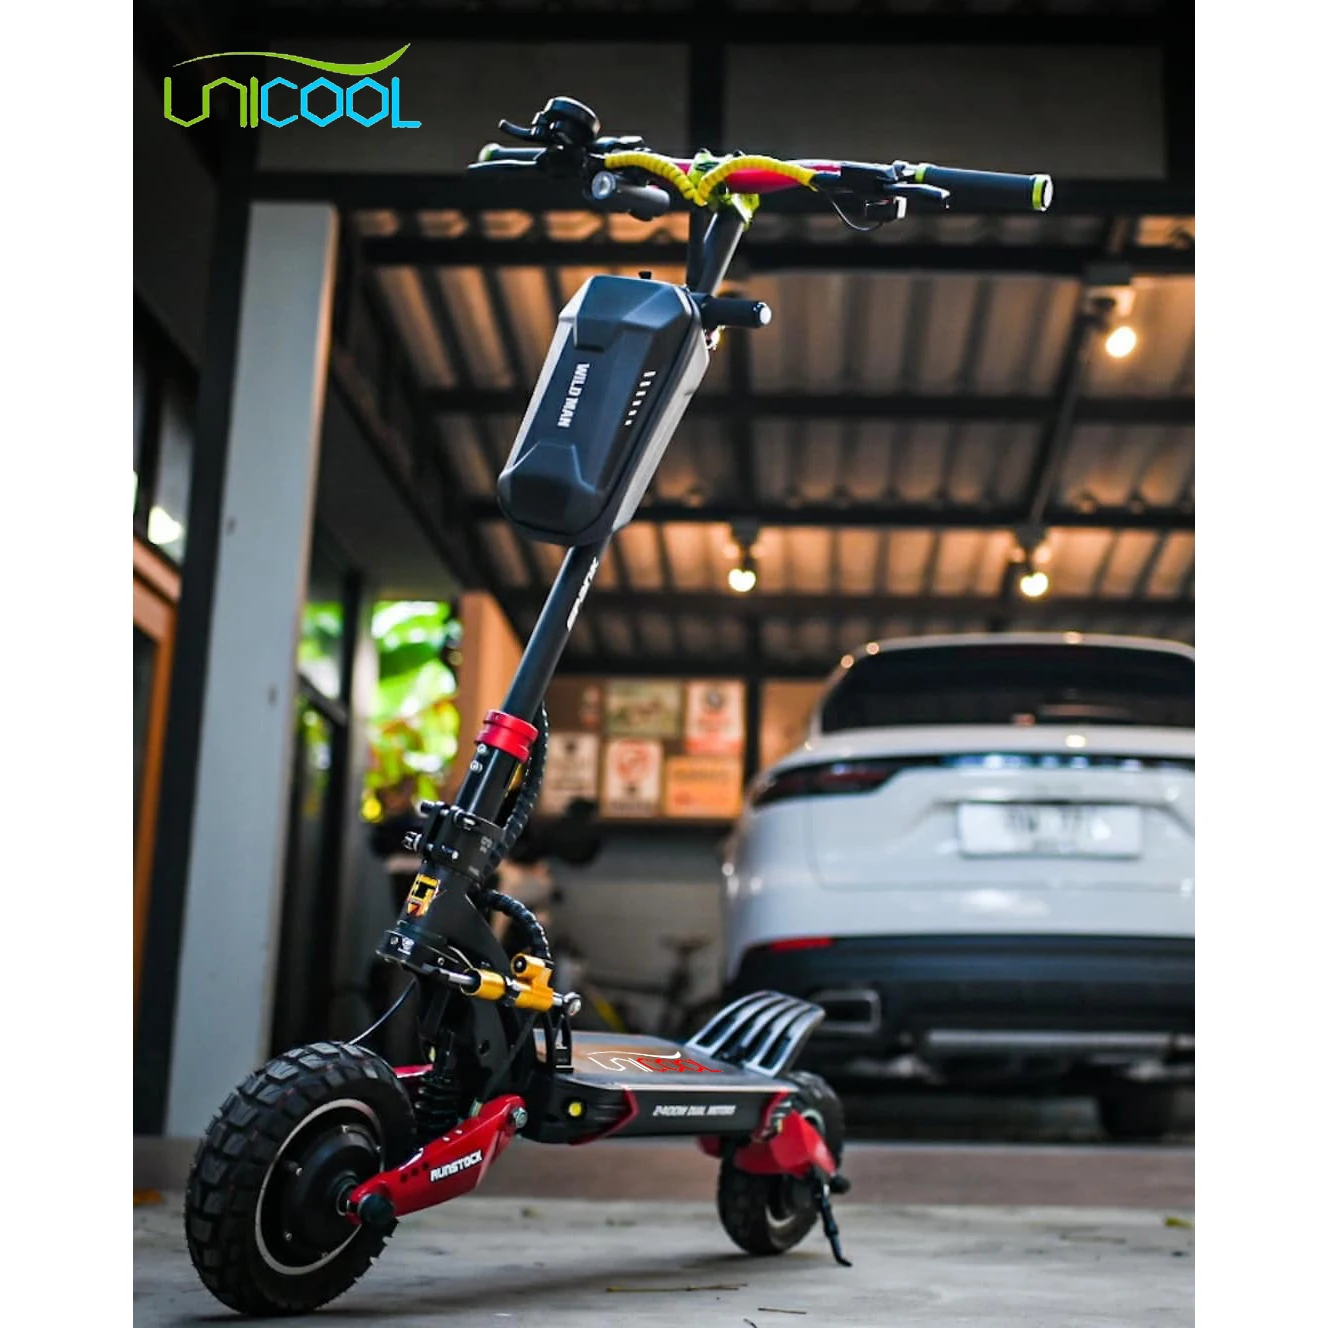 

Unicool 500w 1000w 2000w 3000w double suspension European warehouse folding electric scooter with 10 inch wheel